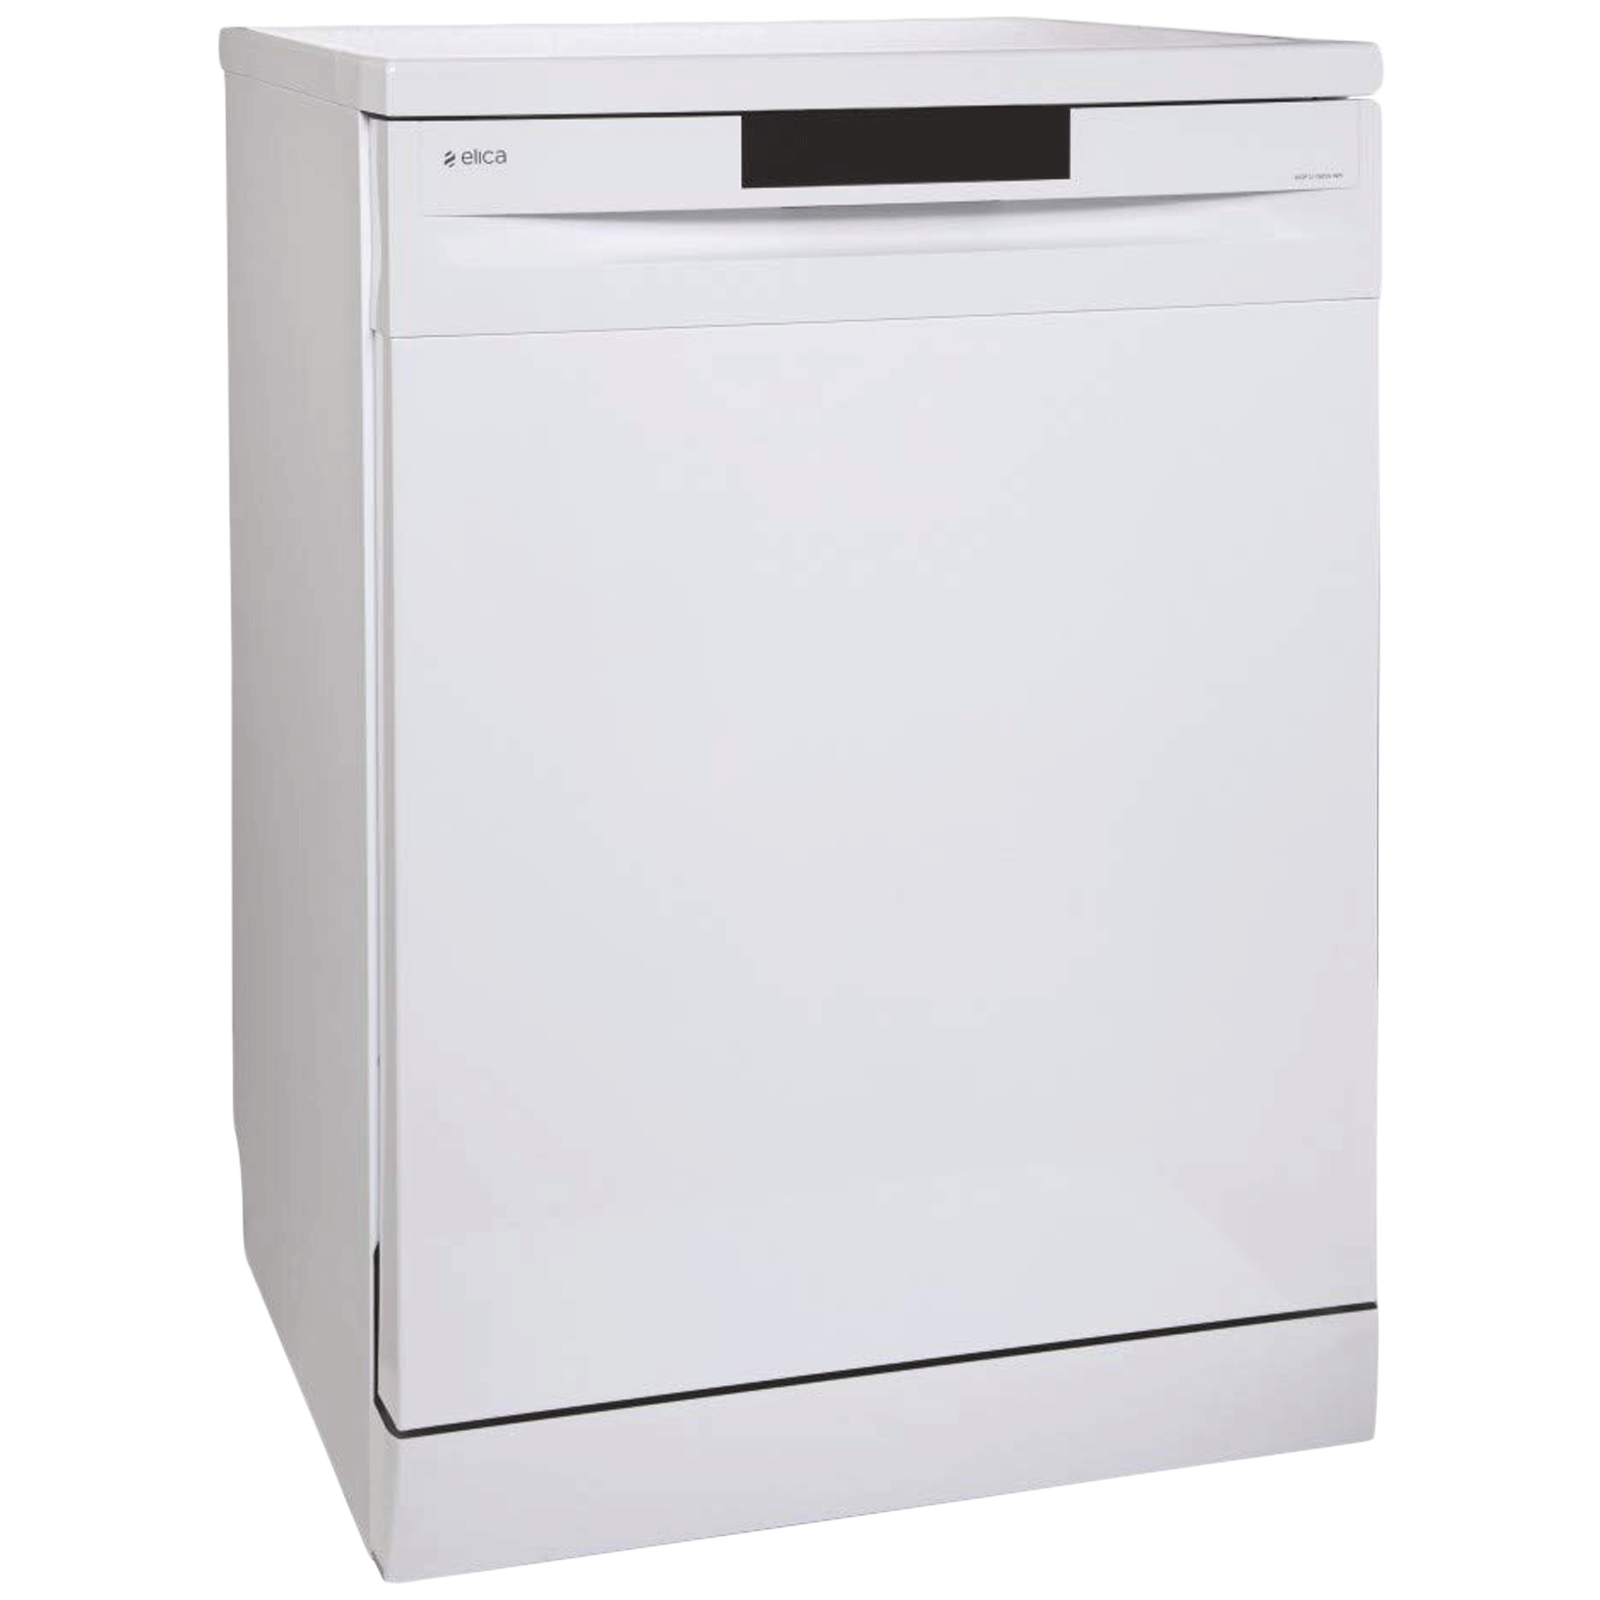 Elica 12 Place Settings Freestanding Dishwasher (Soft Touch Control, WQP12-7605V, Stainless Steel) _1